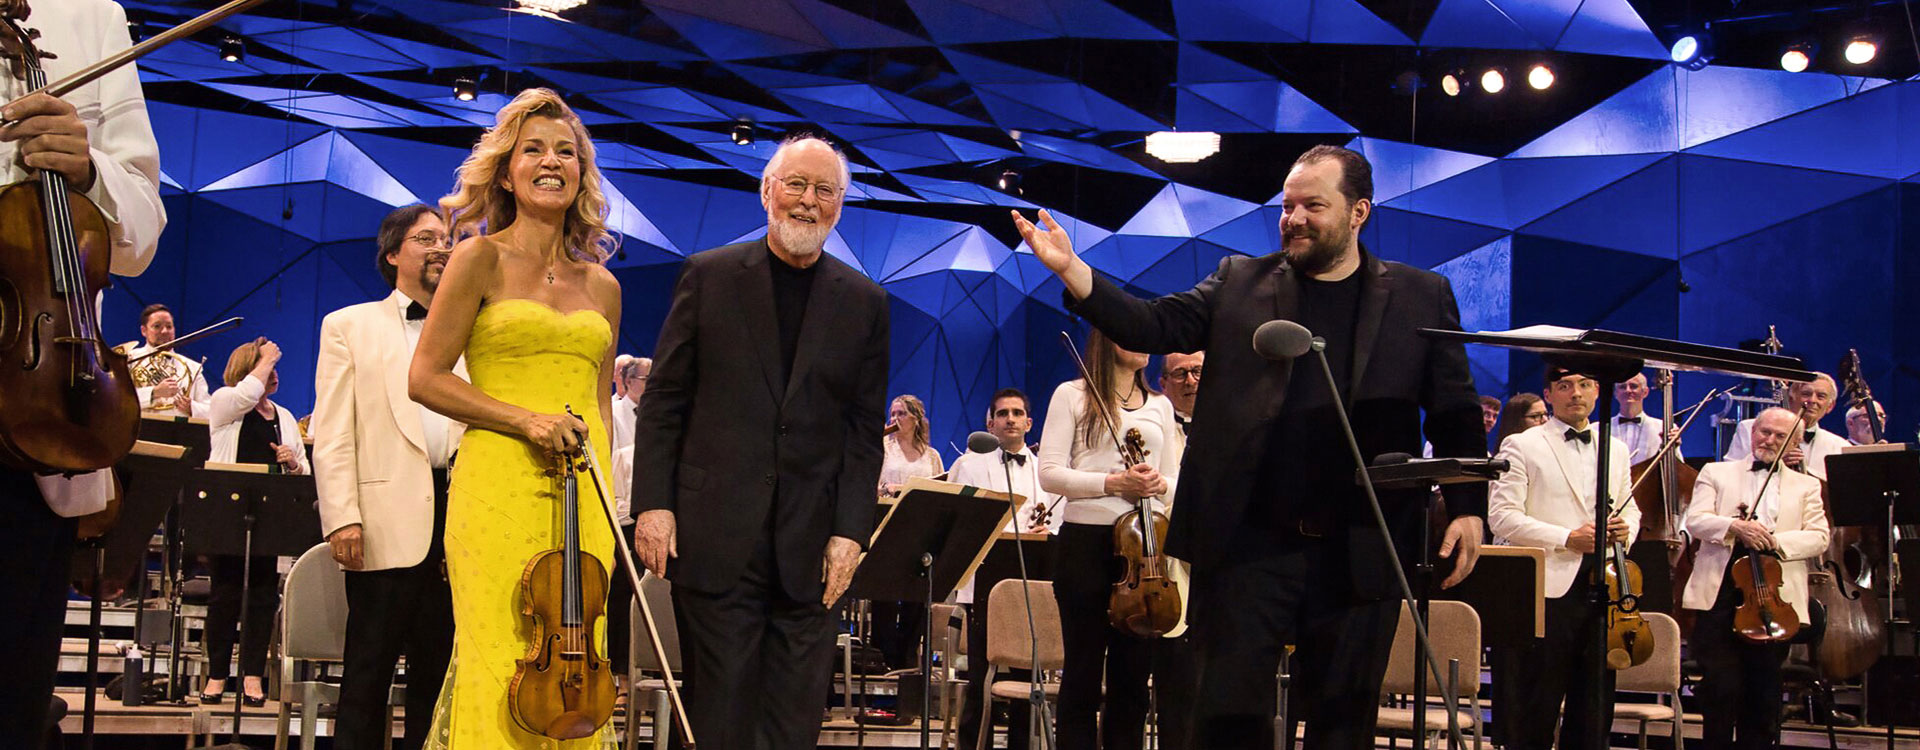 Anne-Sophie Mutter & John Williams at Tanglewood 2021